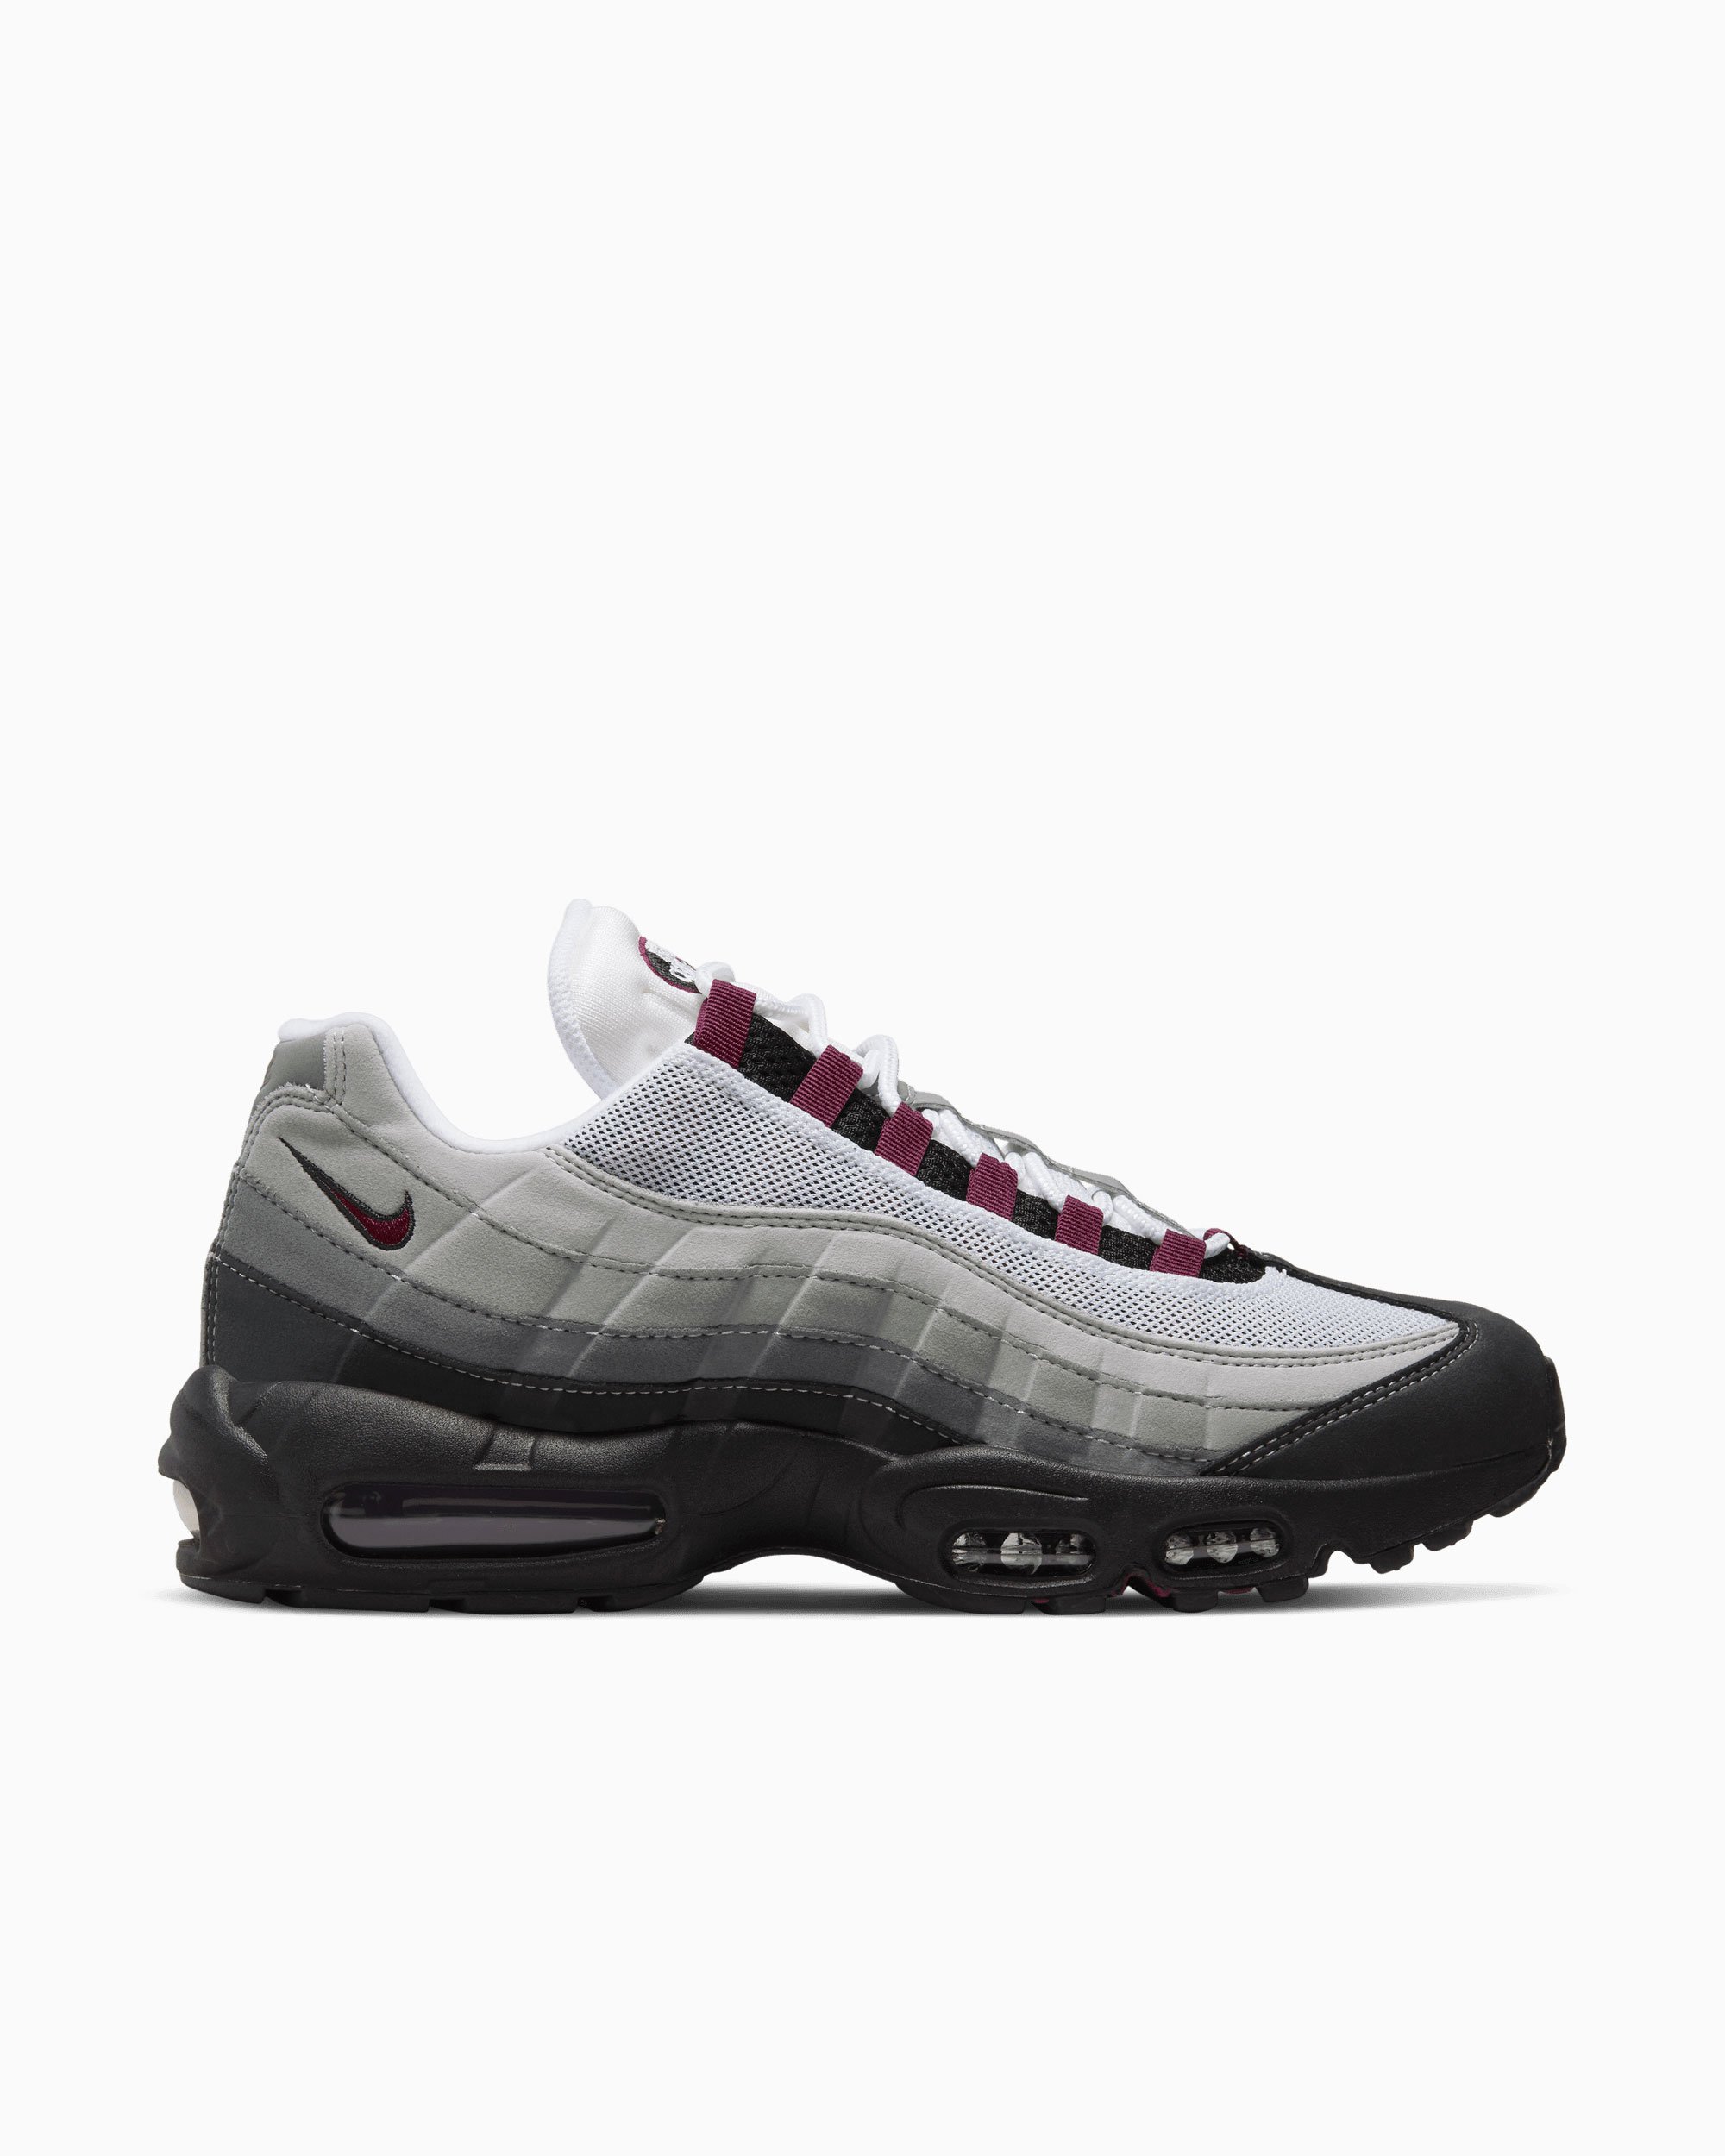 Develop morale archive Nike Air Max 95 "Burgundy" Burgundy DQ9001-001| Buy Online at FOOTDISTRICT